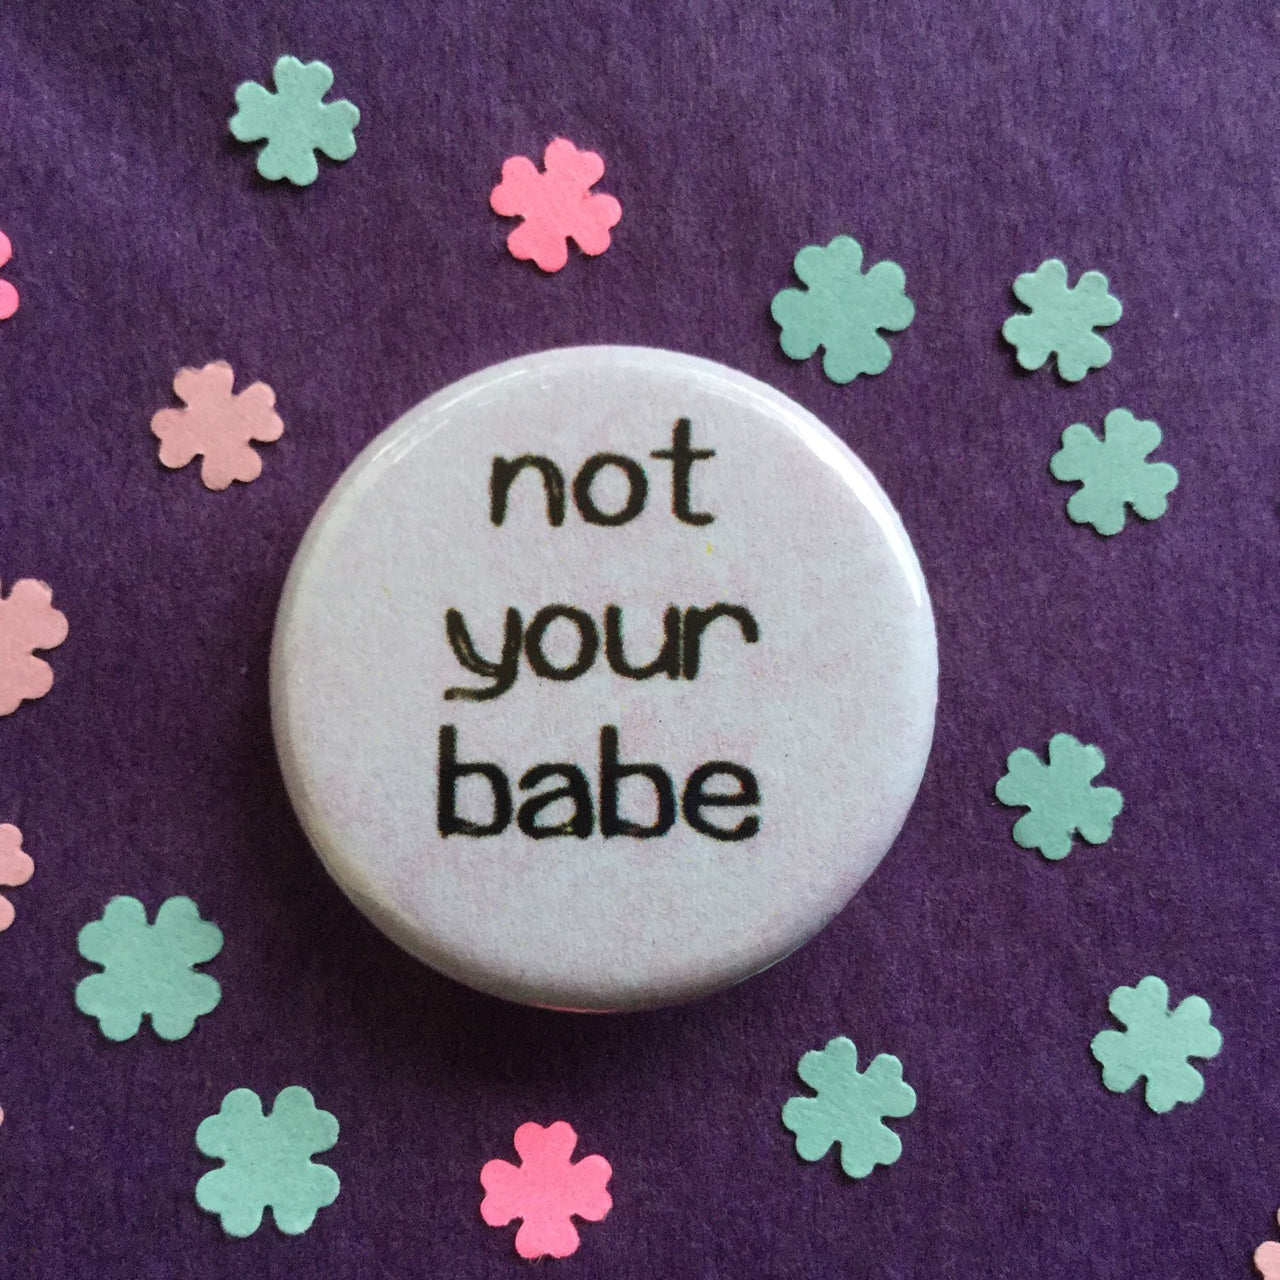 Not your babe - Radical Buttons